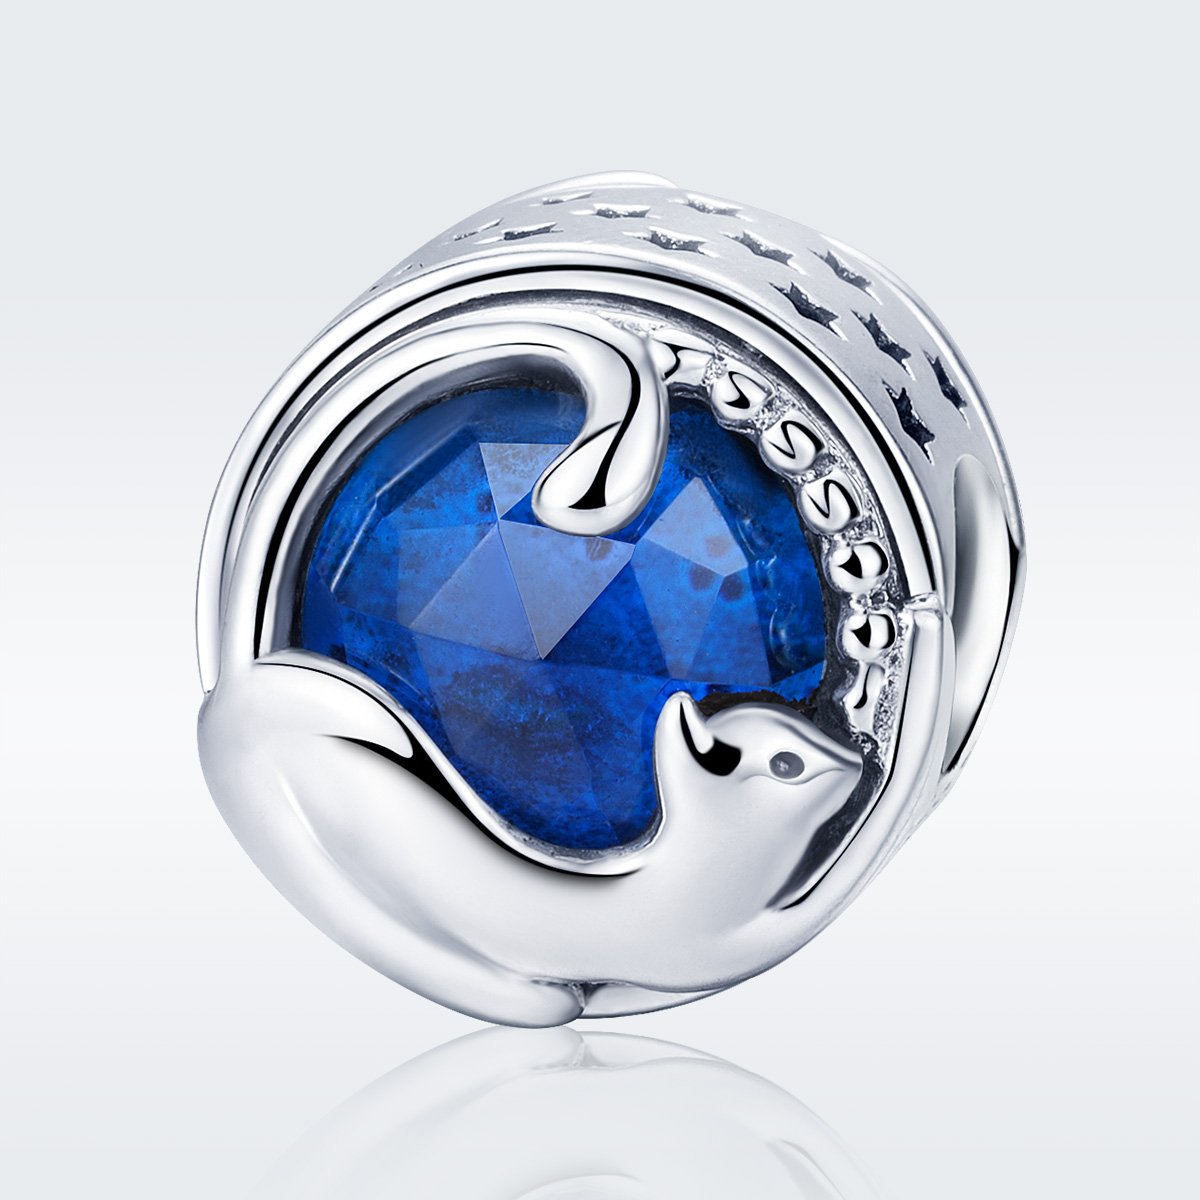 Sterling 925 silver charm the cat and blue fits Pandora charm and European charm bracelet Xaxe.com